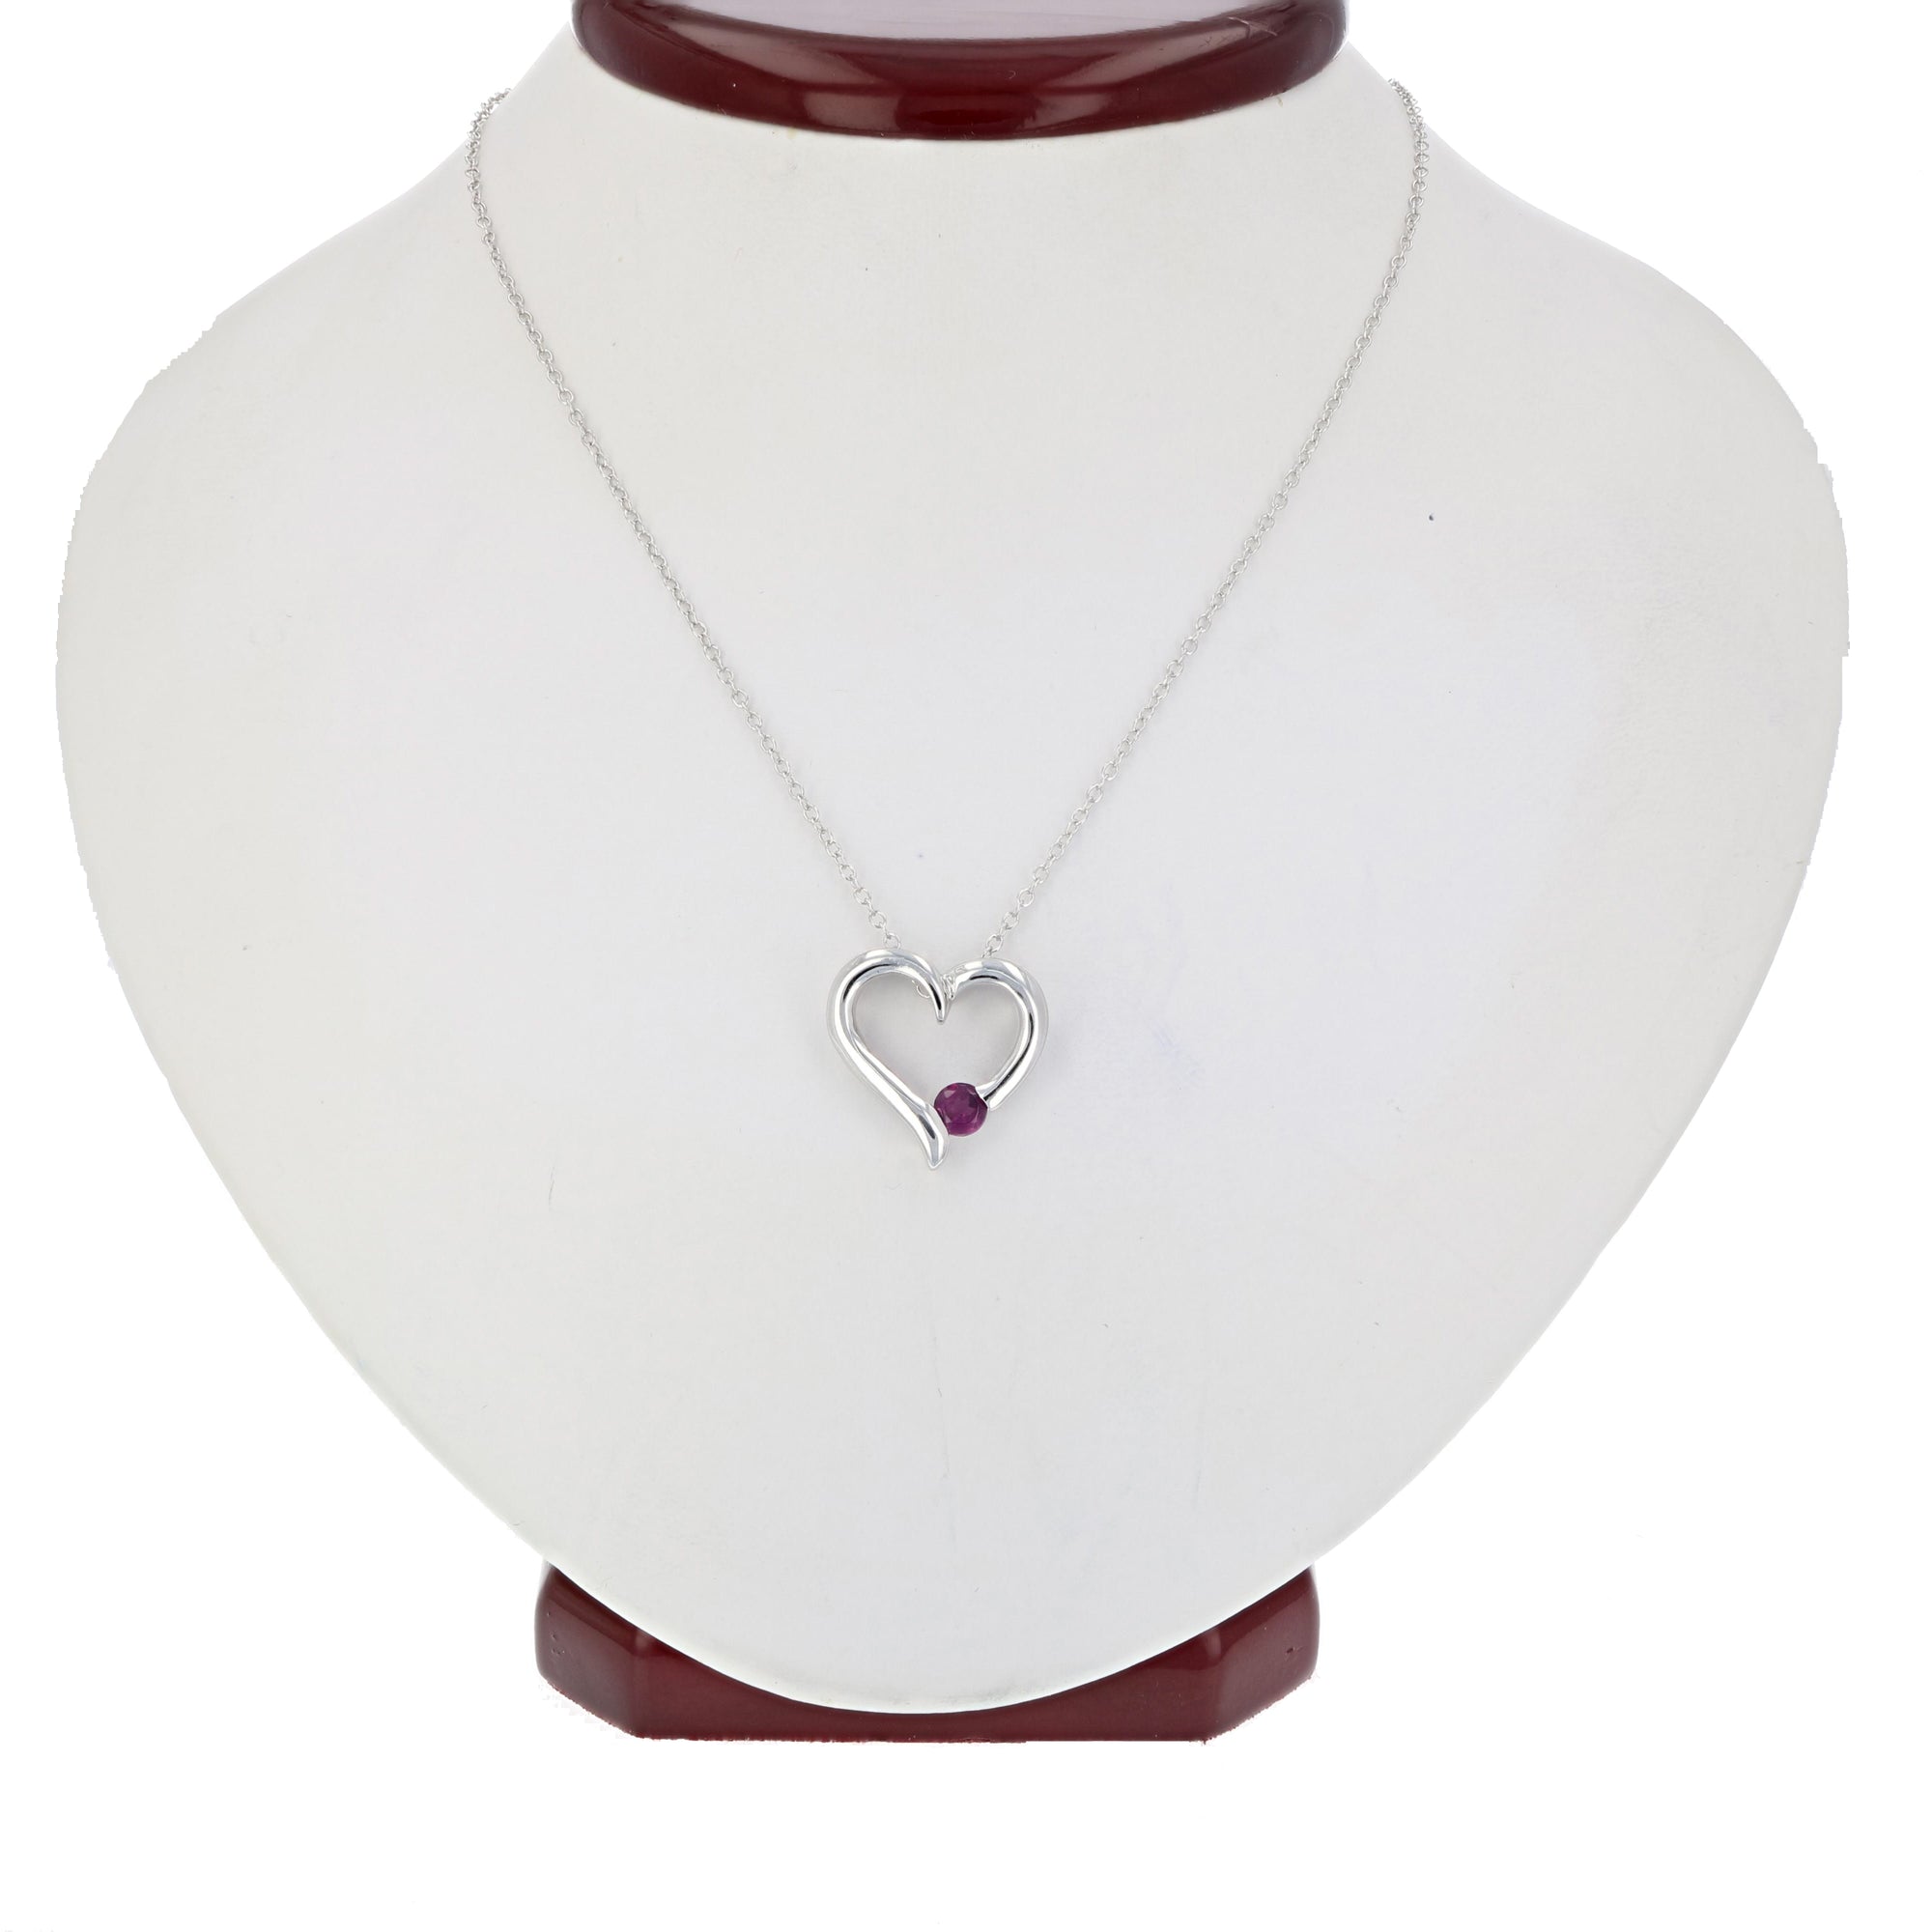 1/4 cttw Pendant Necklace, Garnet Pendant Necklace for Women in .925 Sterling Silver with Rhodium, 18 Inch Chain, Prong Setting